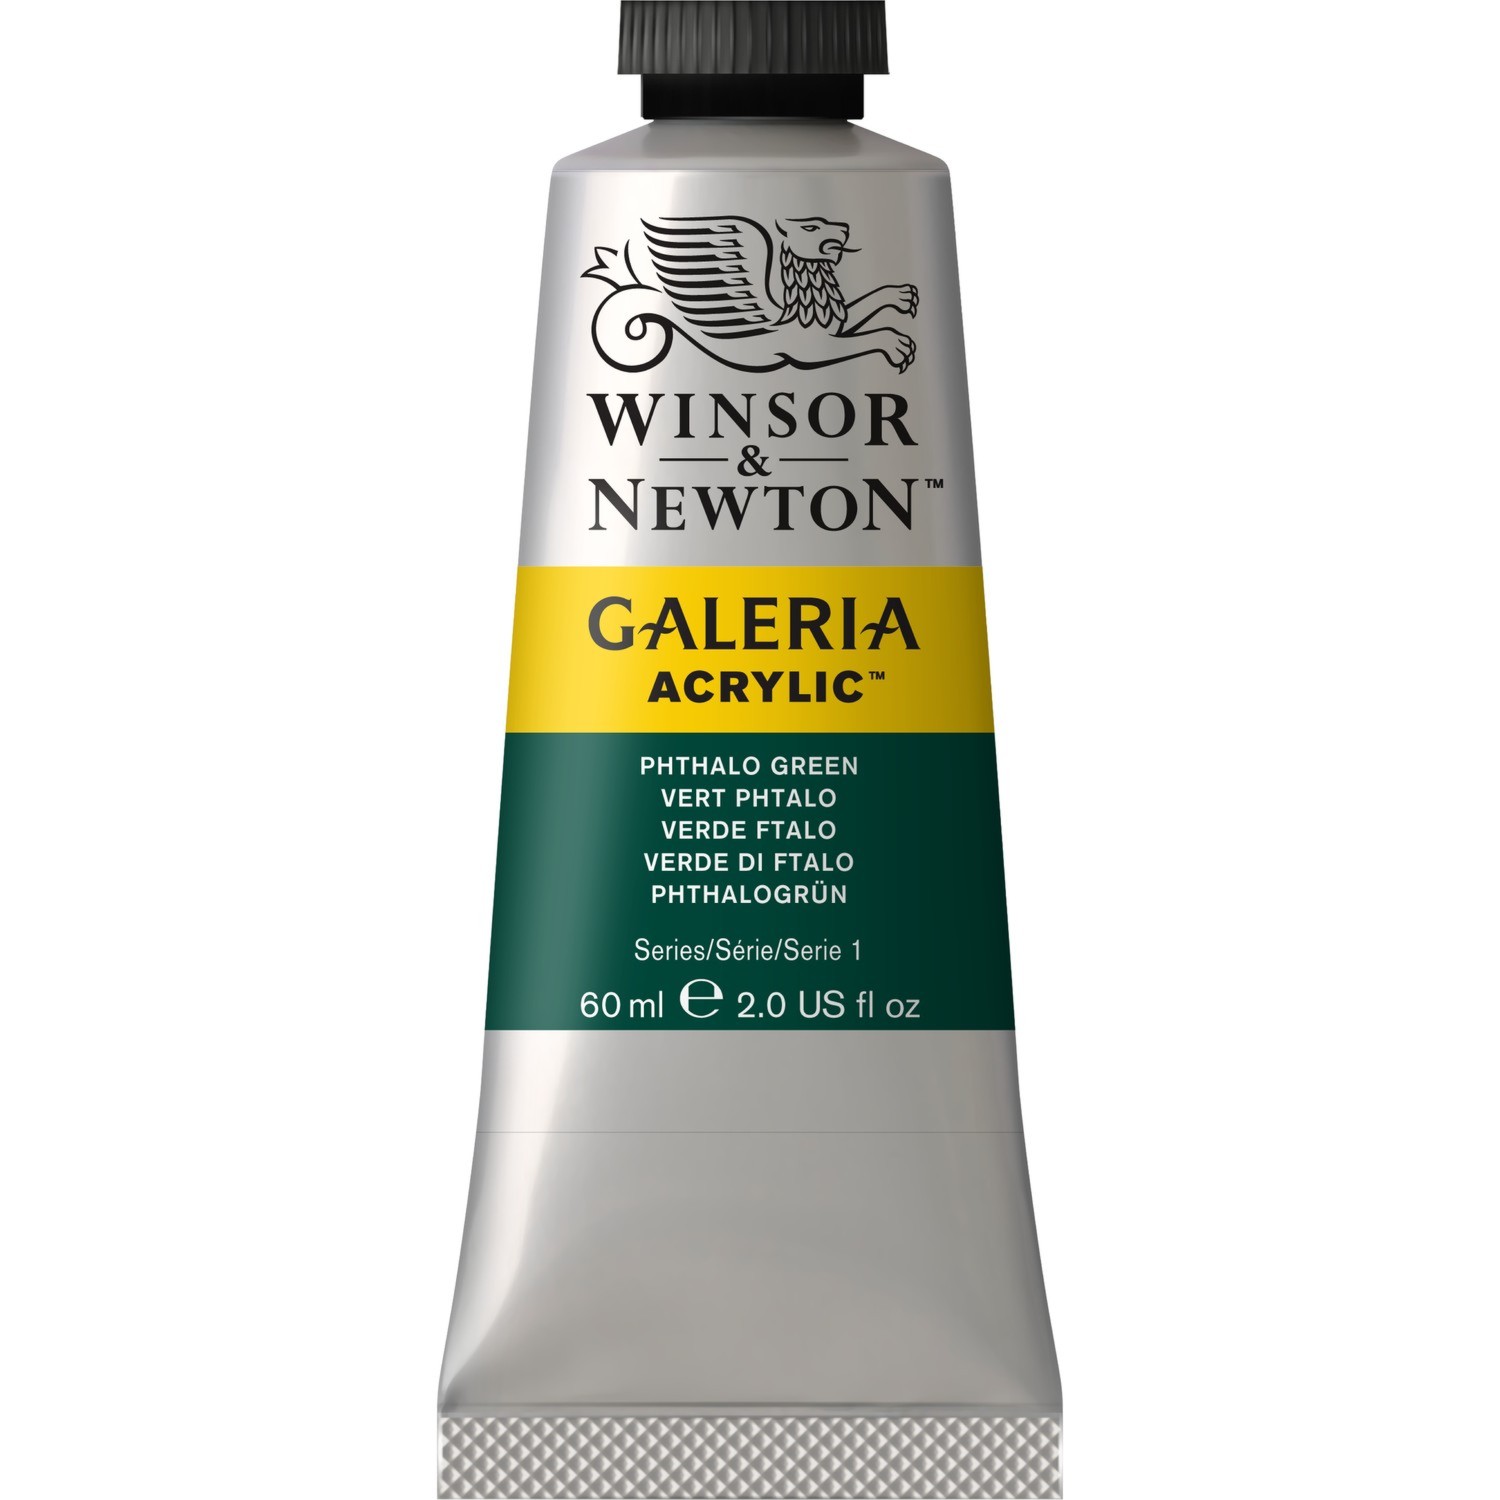 Winsor and Newton 60ml Galeria Acrylic Paint - Phthalo Green Image 1